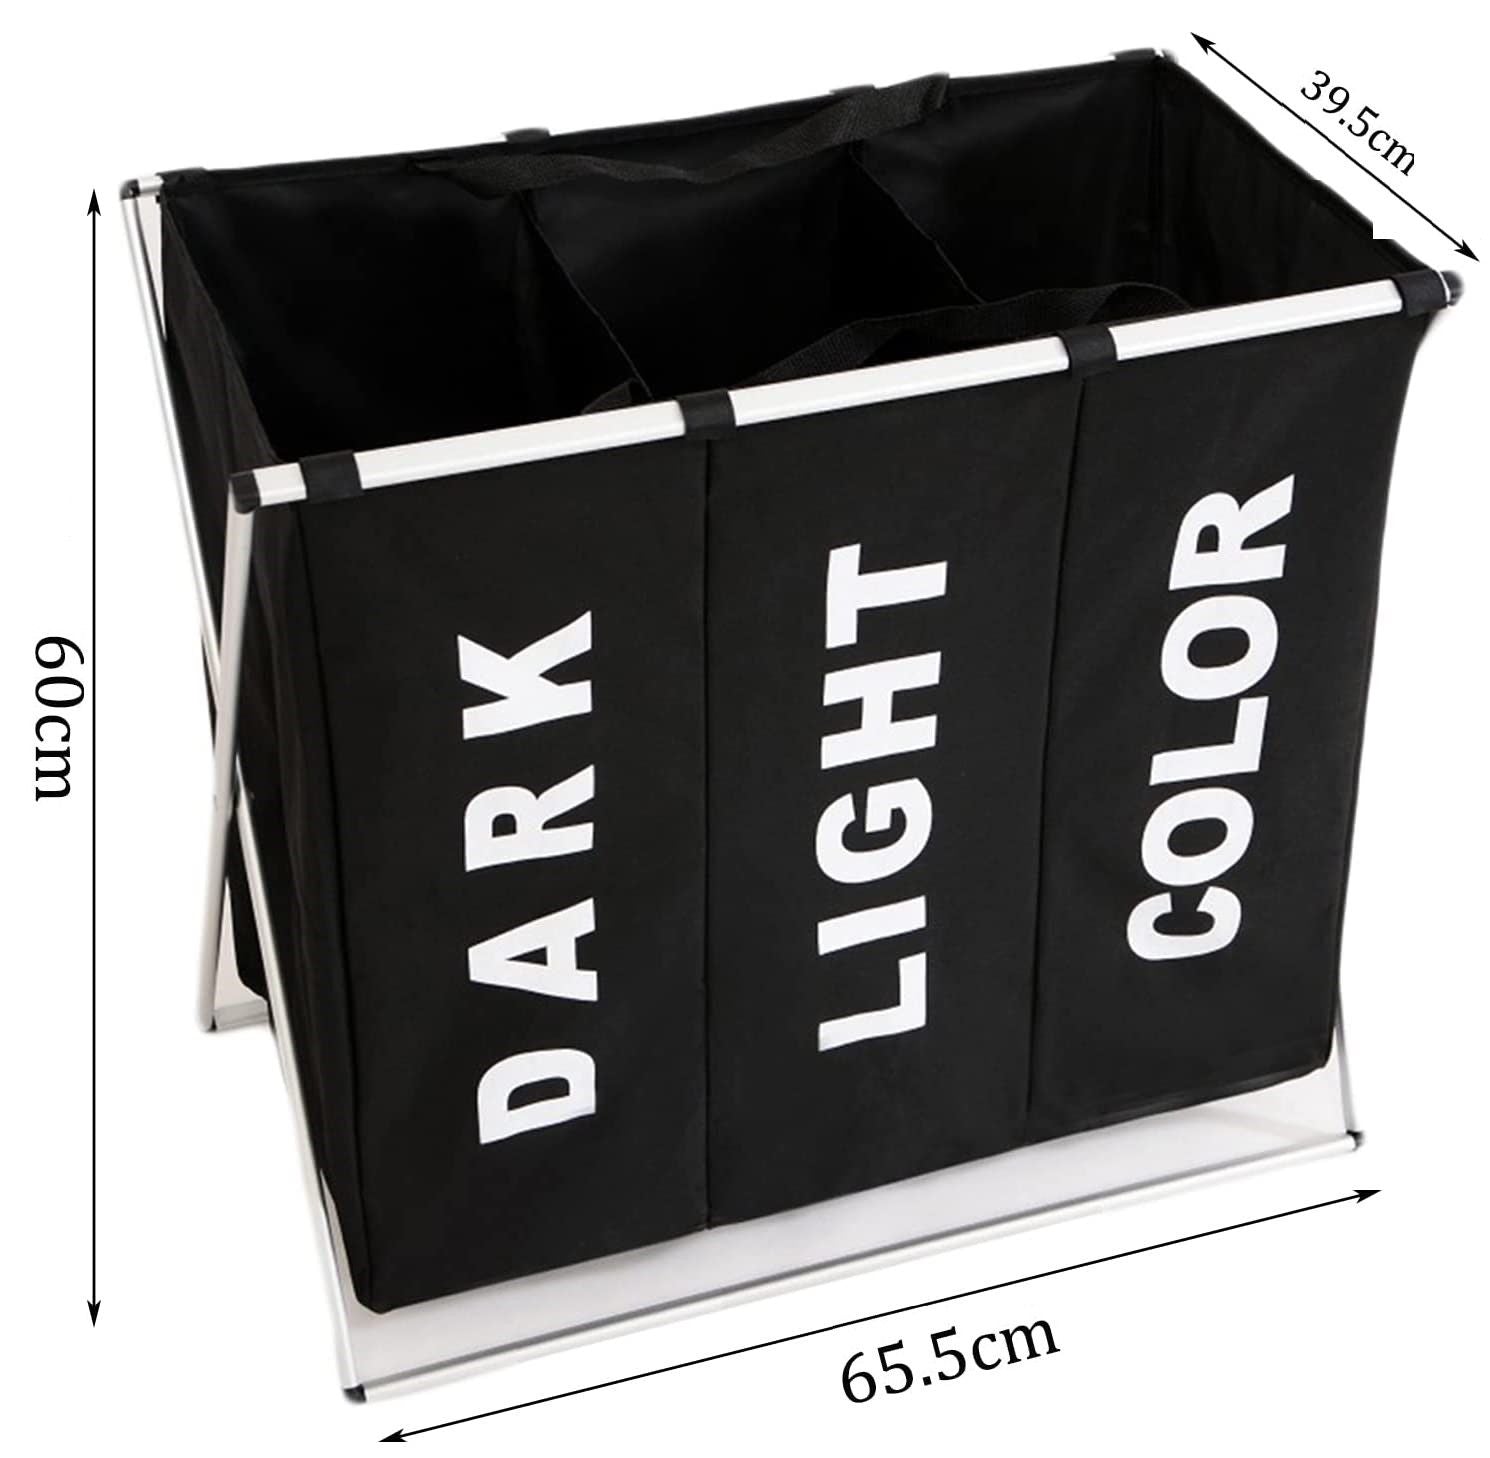 3-in-1-large-135l-laundry-clothes-hamper-basket-with-waterproof-bags-and-aluminum-frame-black